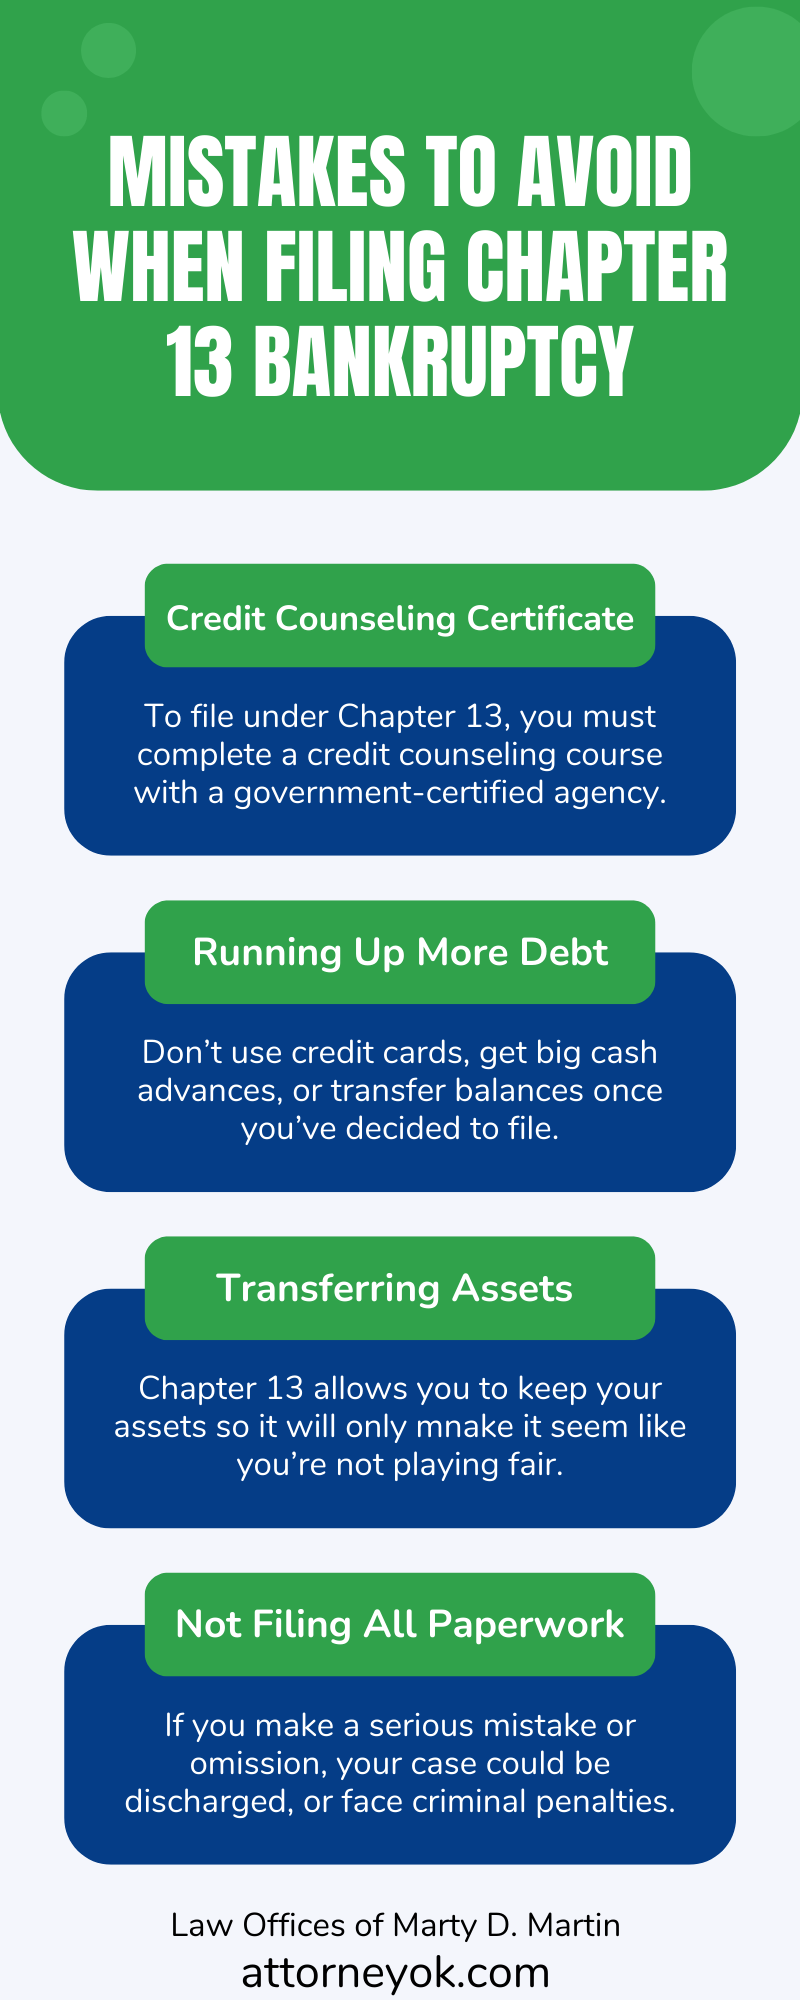 Mistakes to Avoid When Filing Chapter 13 Bankruptcy Infographic